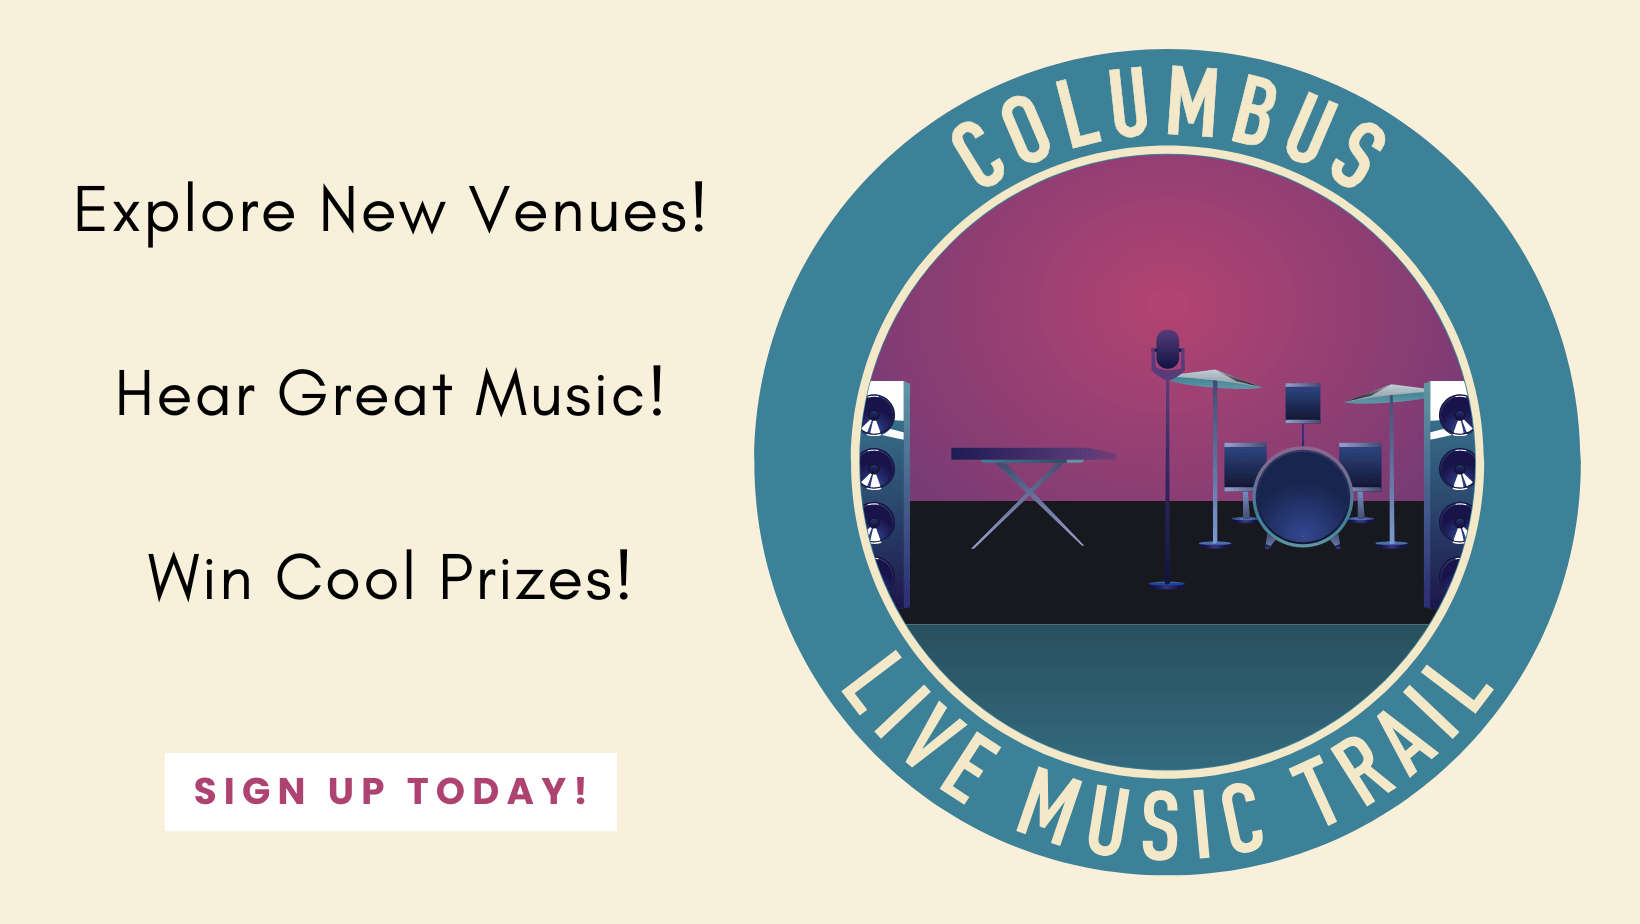 Sign Up for the Columbus Live Music Trail Today